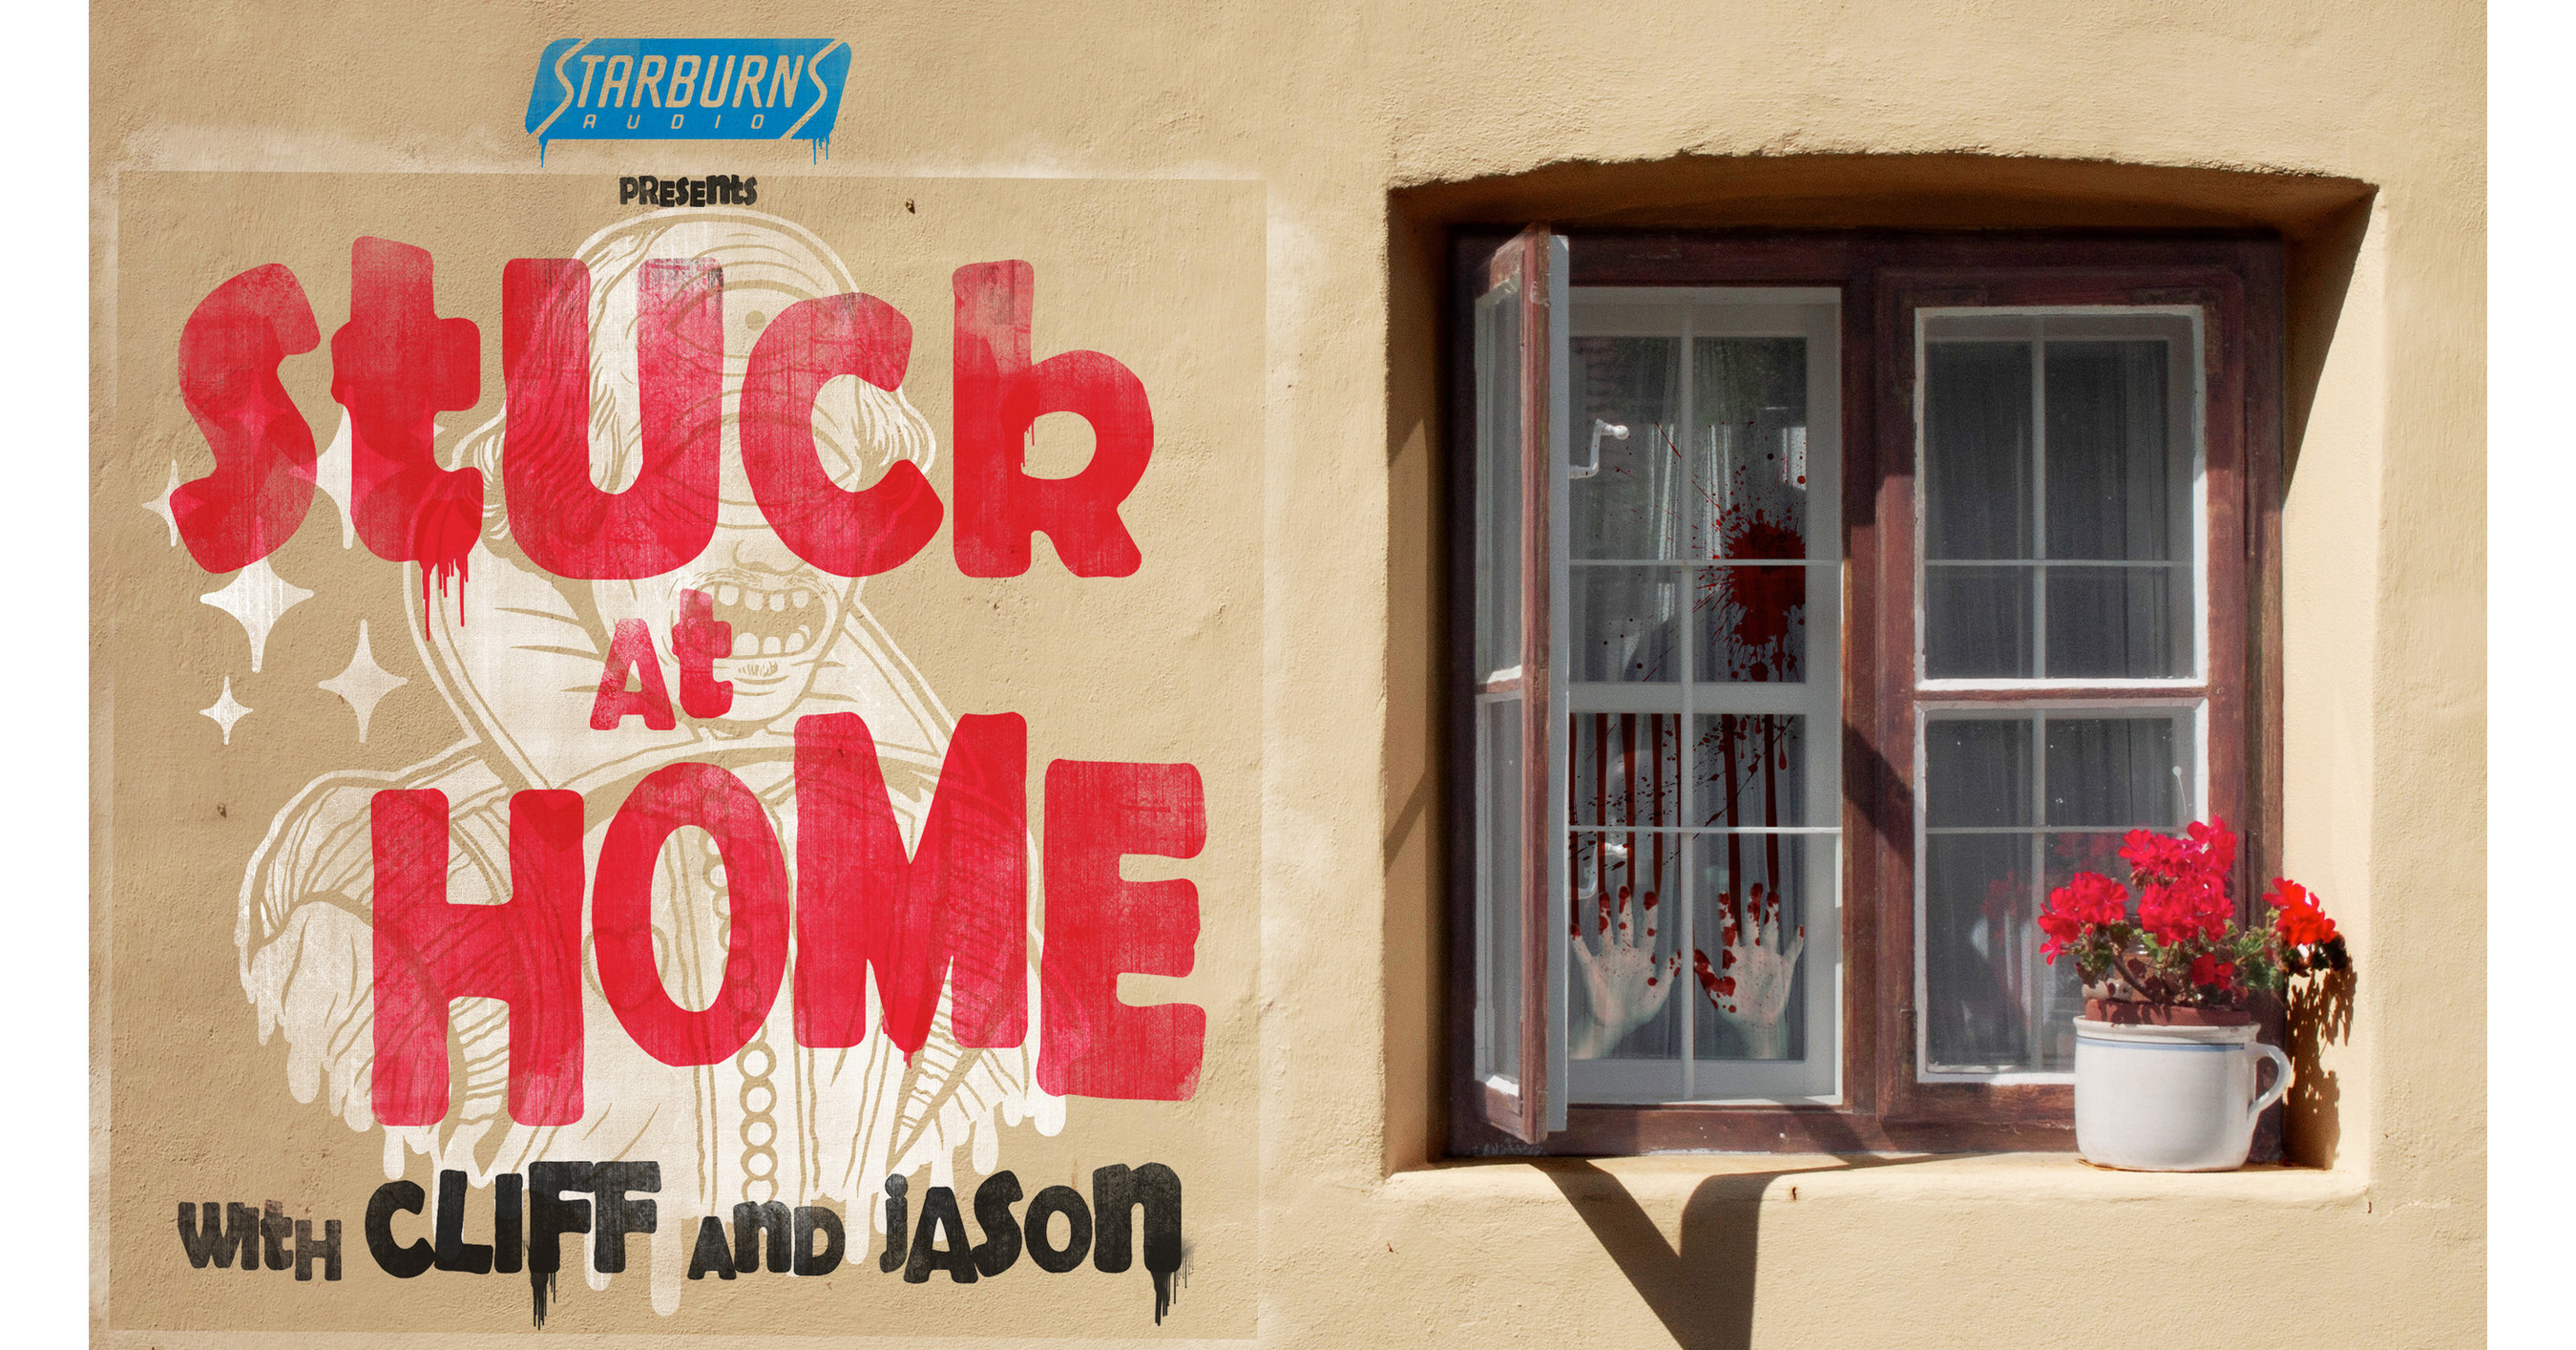  Stuck At Home with Cliff and Jason Presented by Starburns Audio  : Starburns Audio LLC: Books